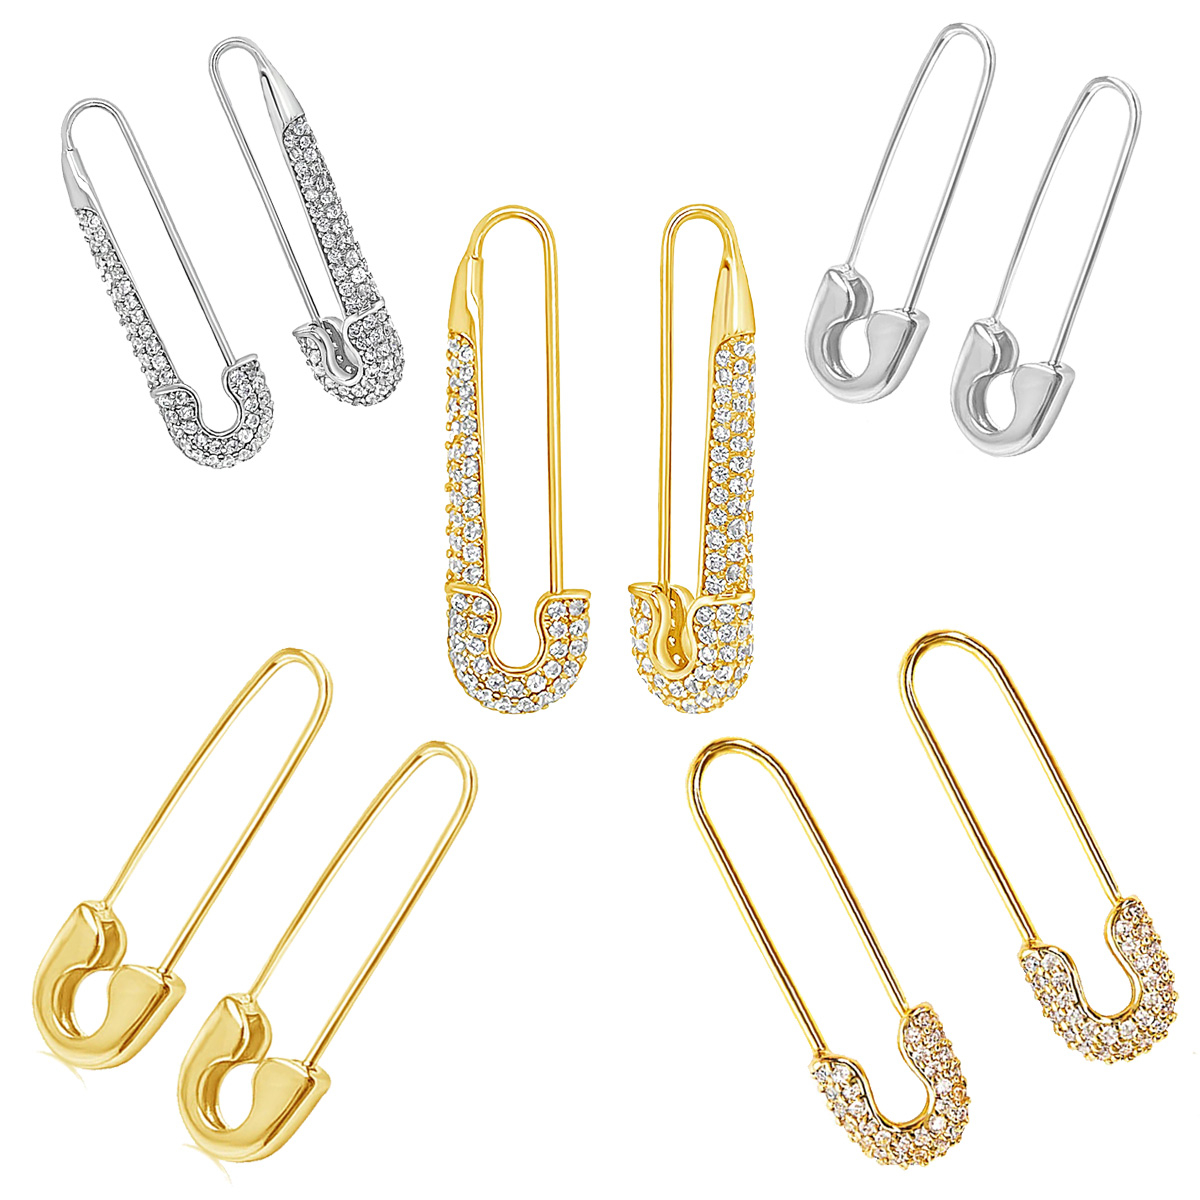 These $15 Safety Pin Earrings Have Over 1,600 Five-Star  Reviews